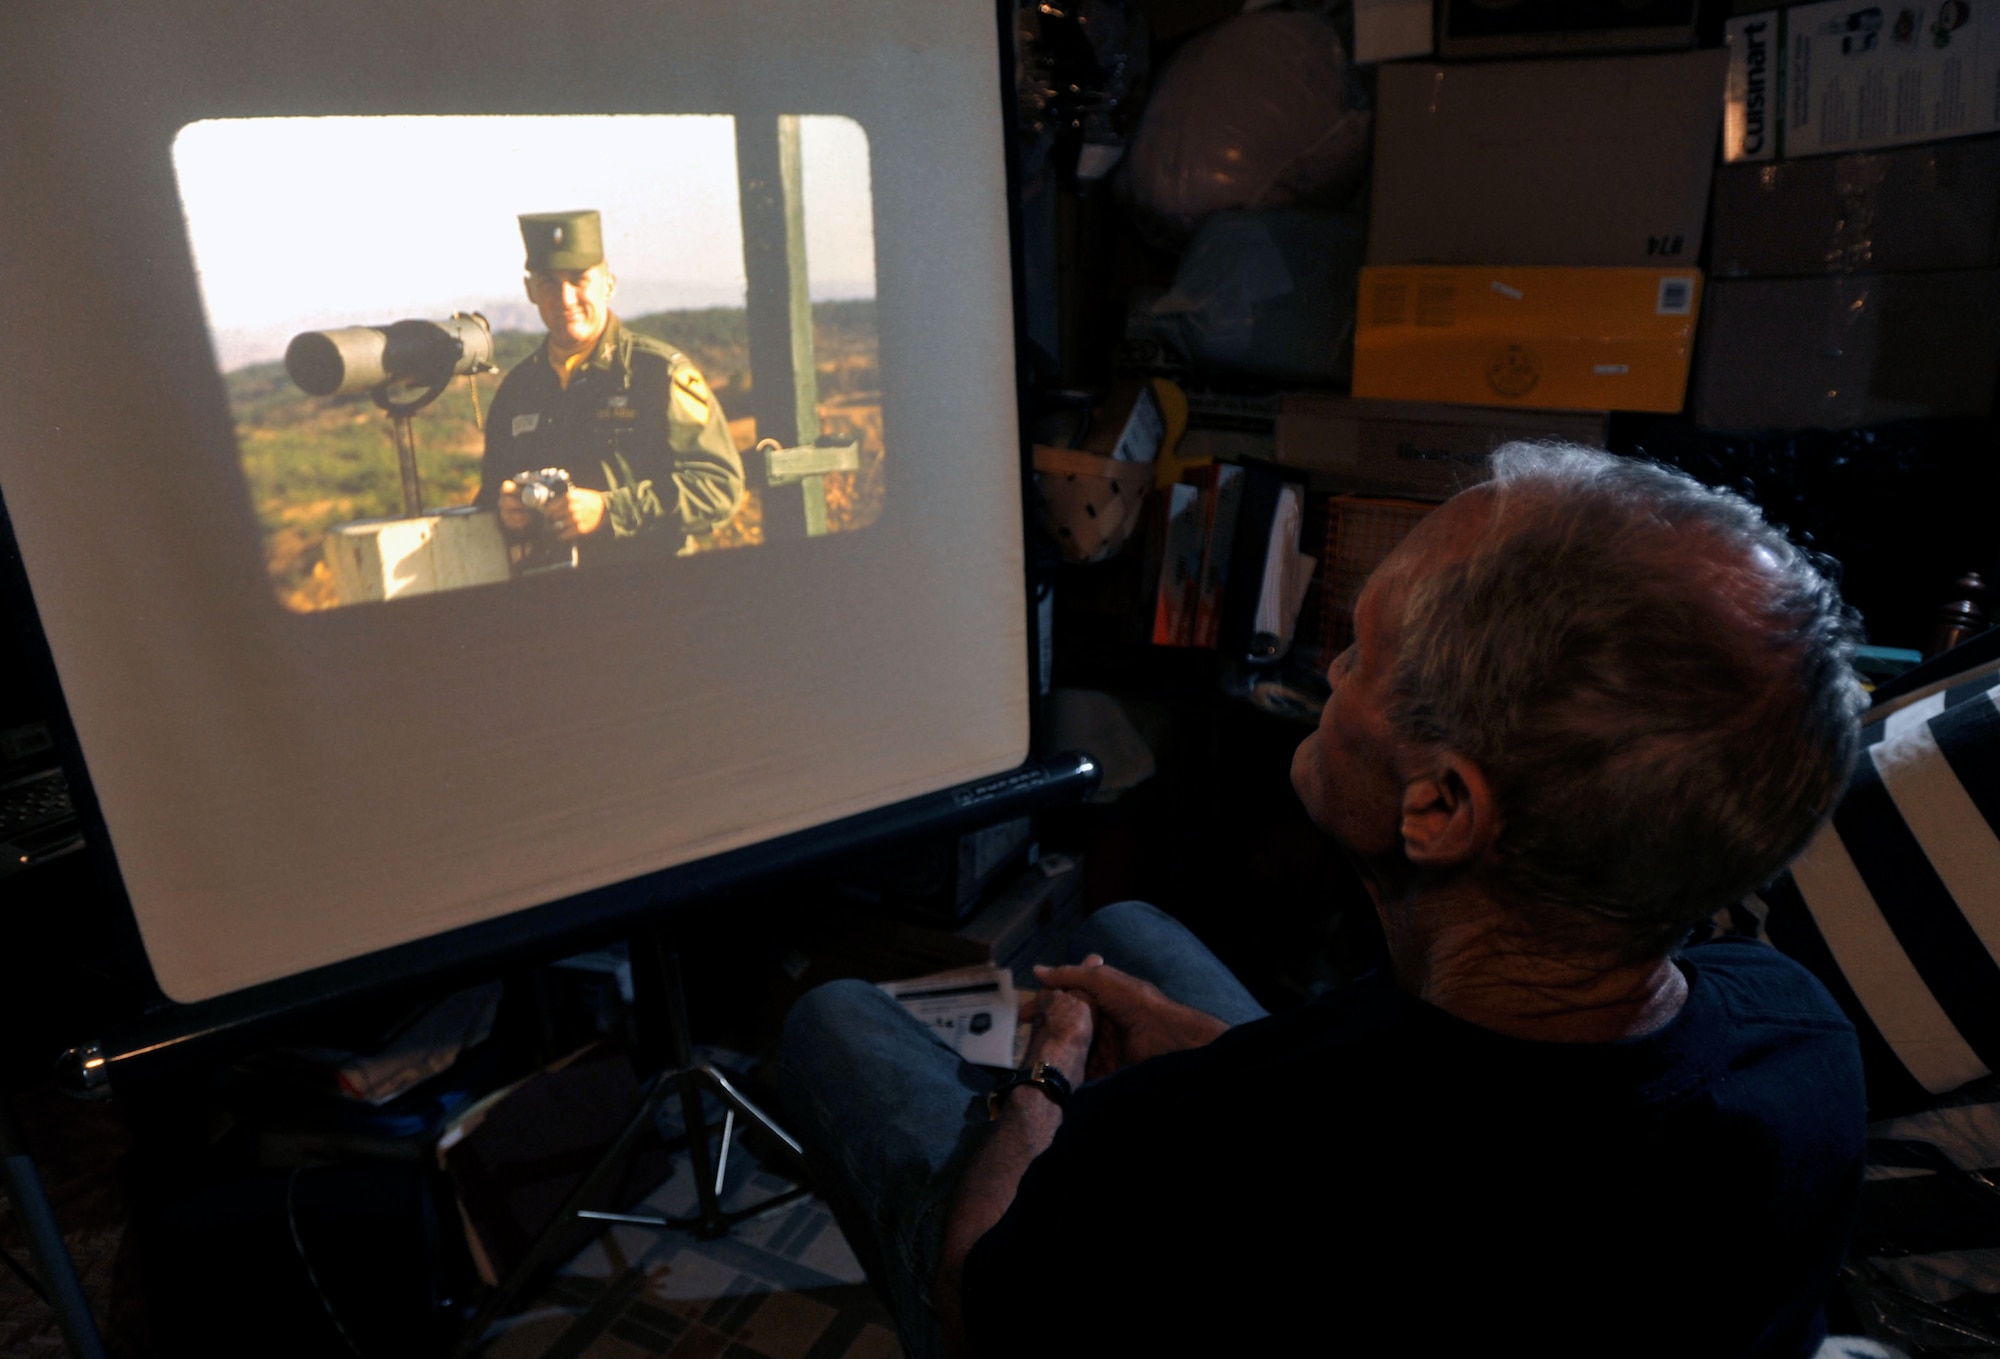 Retired U.S. Army Maj. E. Vernon Smith Jr. looks at a photo of himself as a first lieutenant while stationed in South Korea at his home in central Virginia, July 20, 2013. In support of the Korean Armistice Agreement signed July 27, 1953, Smith was assigned as the executive officer of the 24th Infantry Division Replacement Company, which later became the 1st Cavalry Division, and oversaw the logistics of coordinating replacement units. (U.S. Air Force photo by Staff Sgt. Katie Gar Ward/Released) 